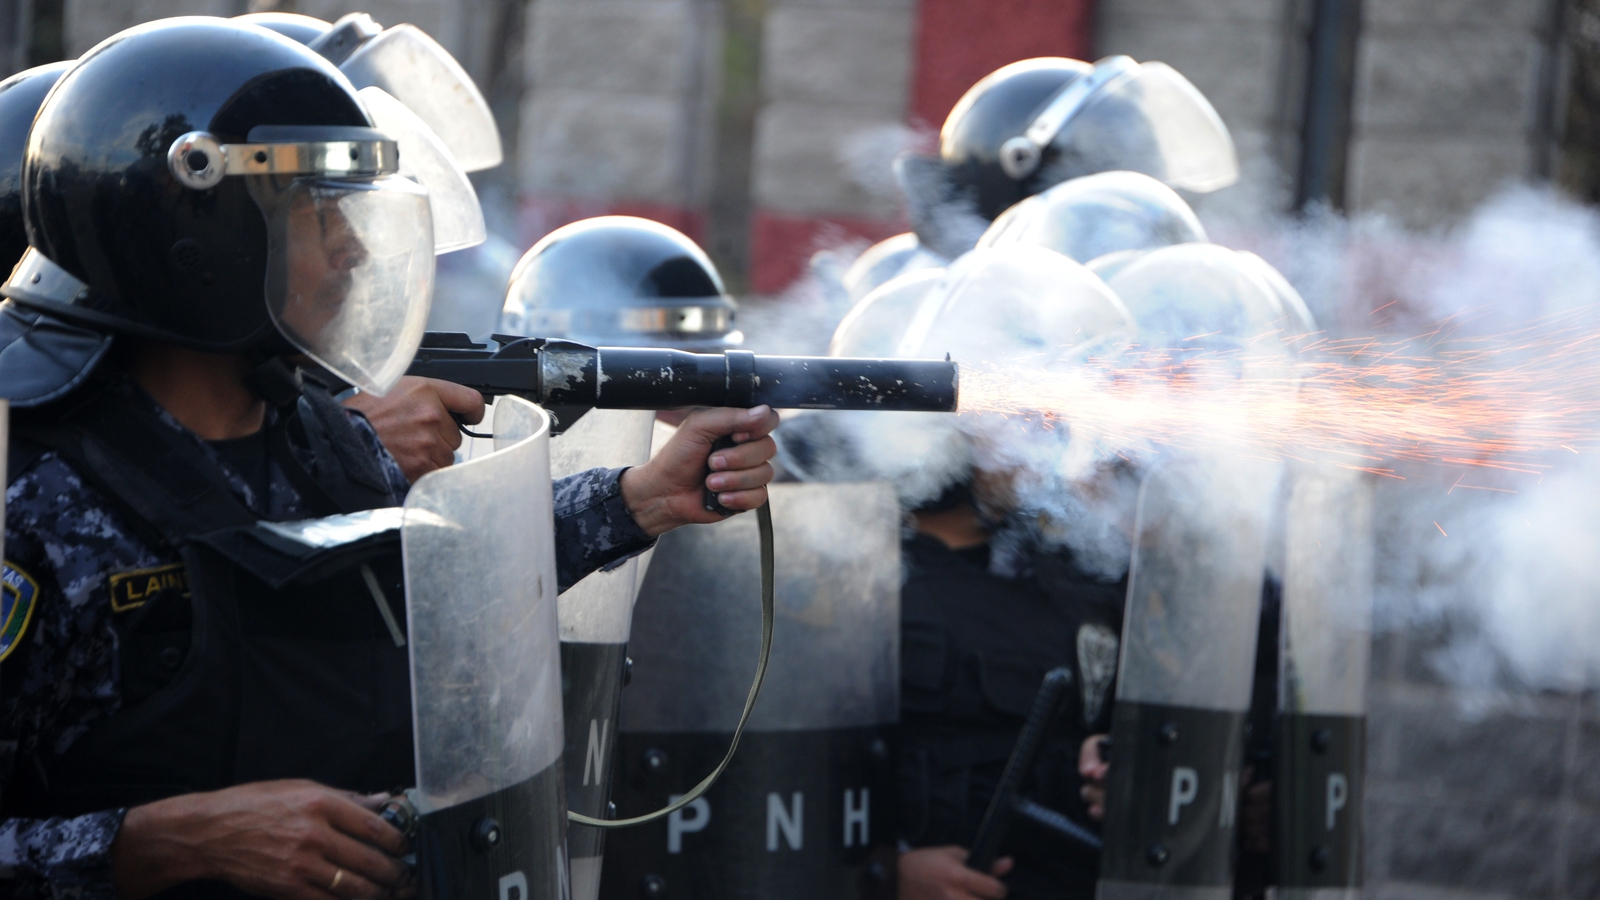 Image - Police use tear gas at students protesting after a killing in Honduras